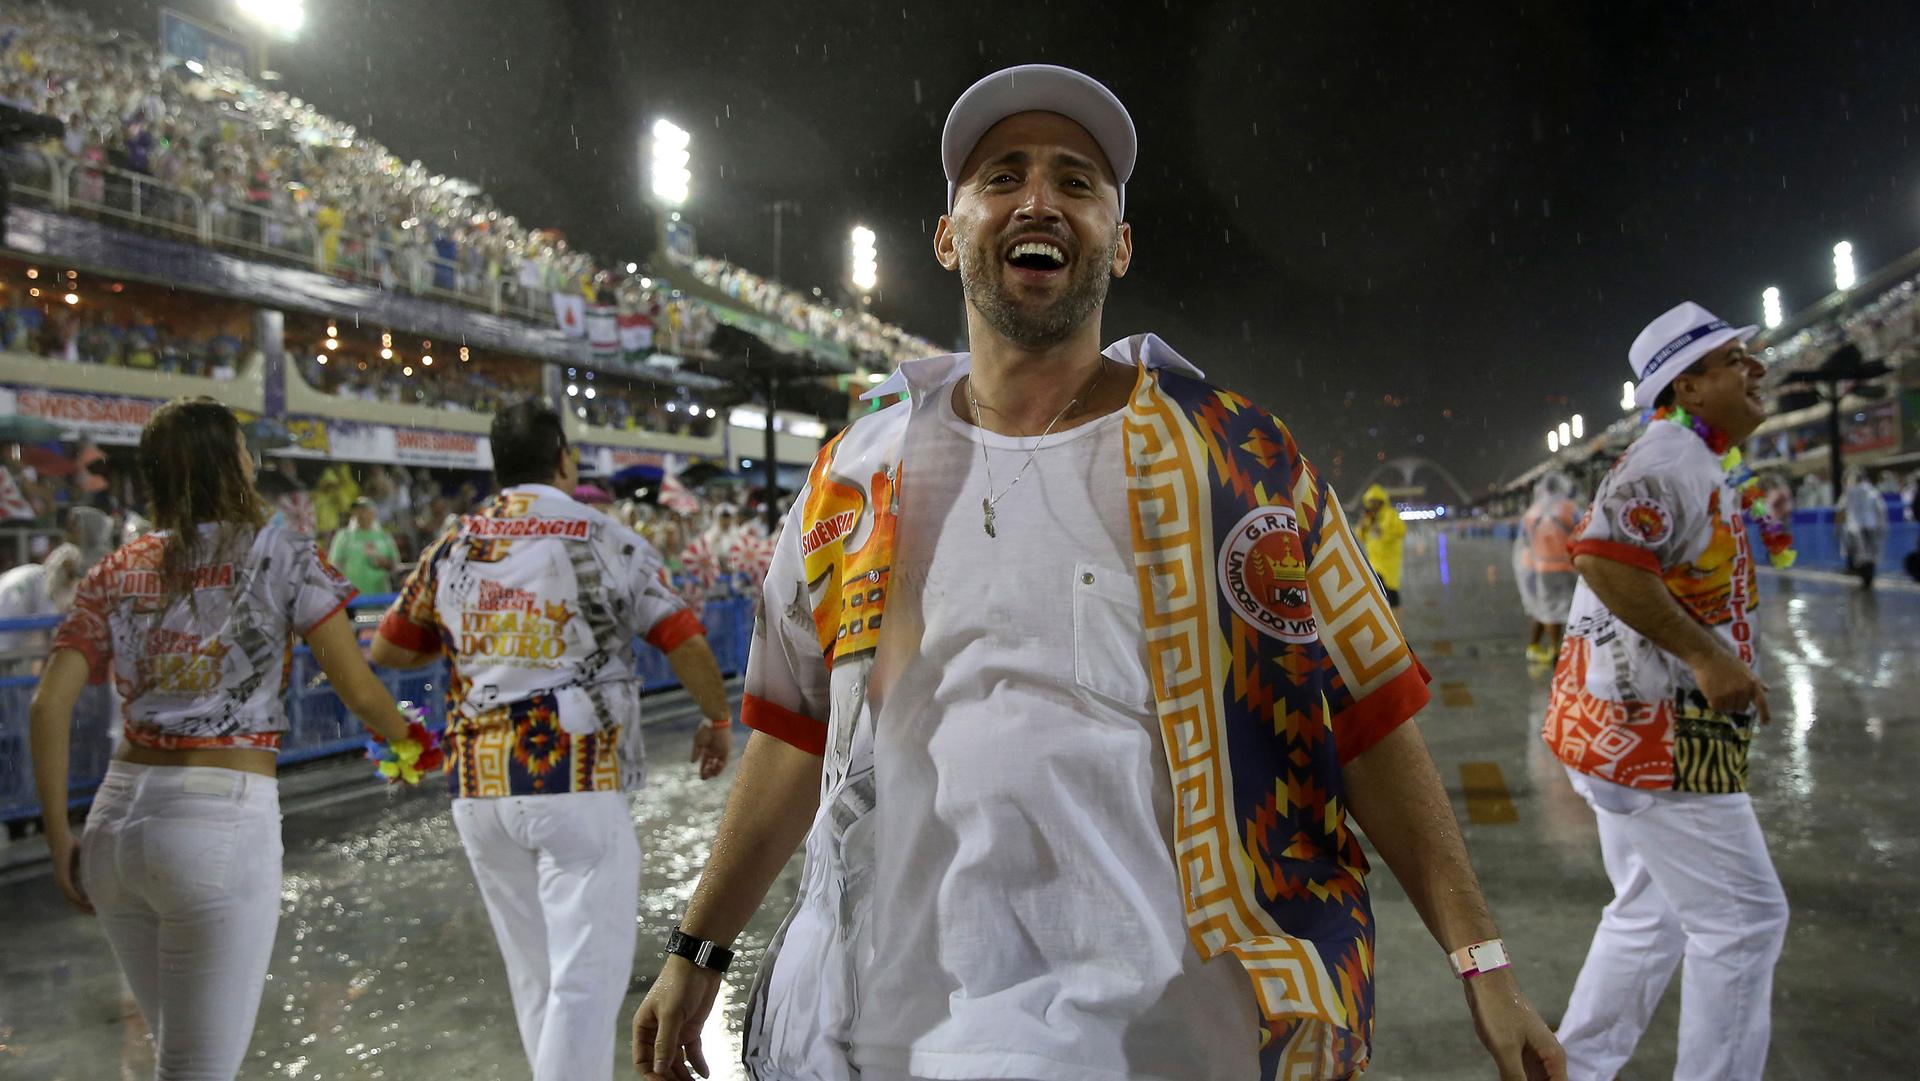 Comedian and actor Paulo Gustavo is shown wearing mostly white and brightly colored overshirt and smiling among other Carnival goers.